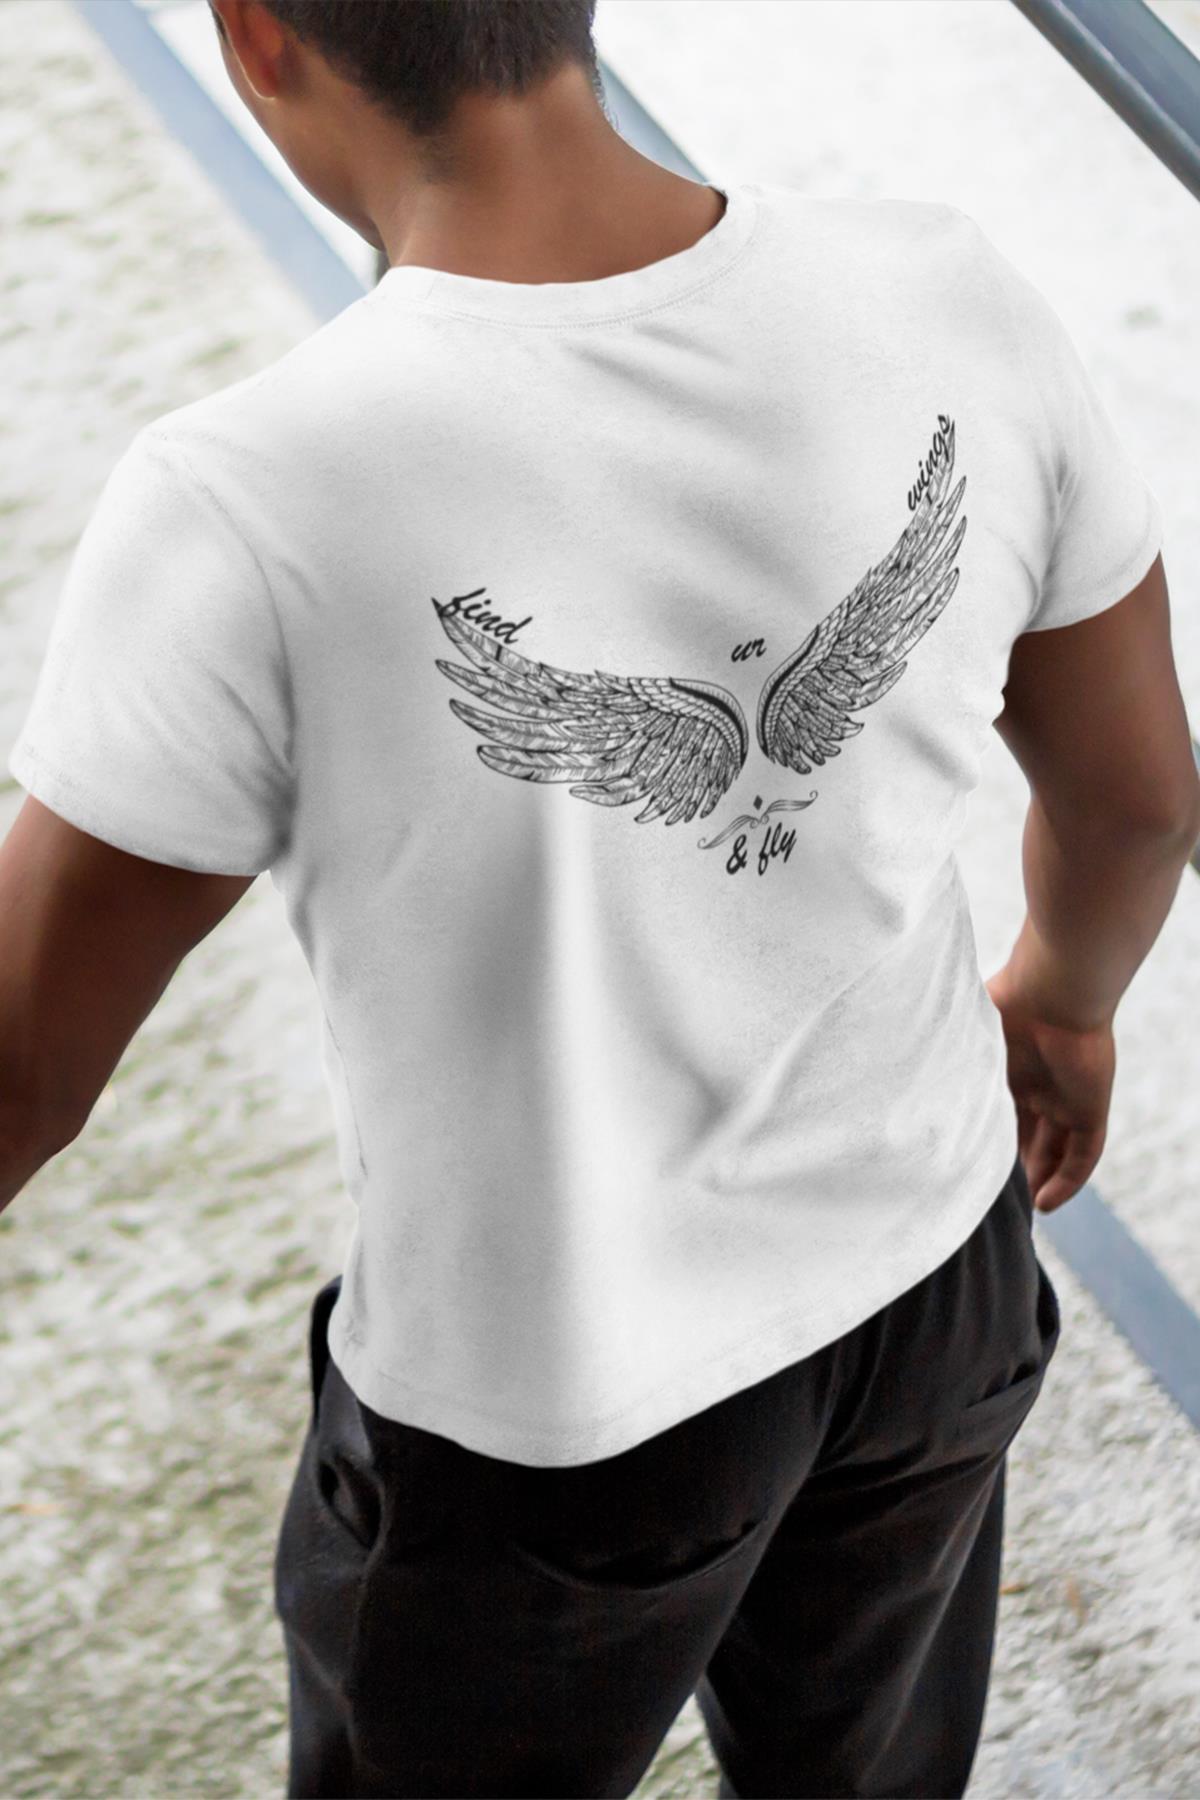 Behind the eagle wing printed Crew Neck men's t -shirt